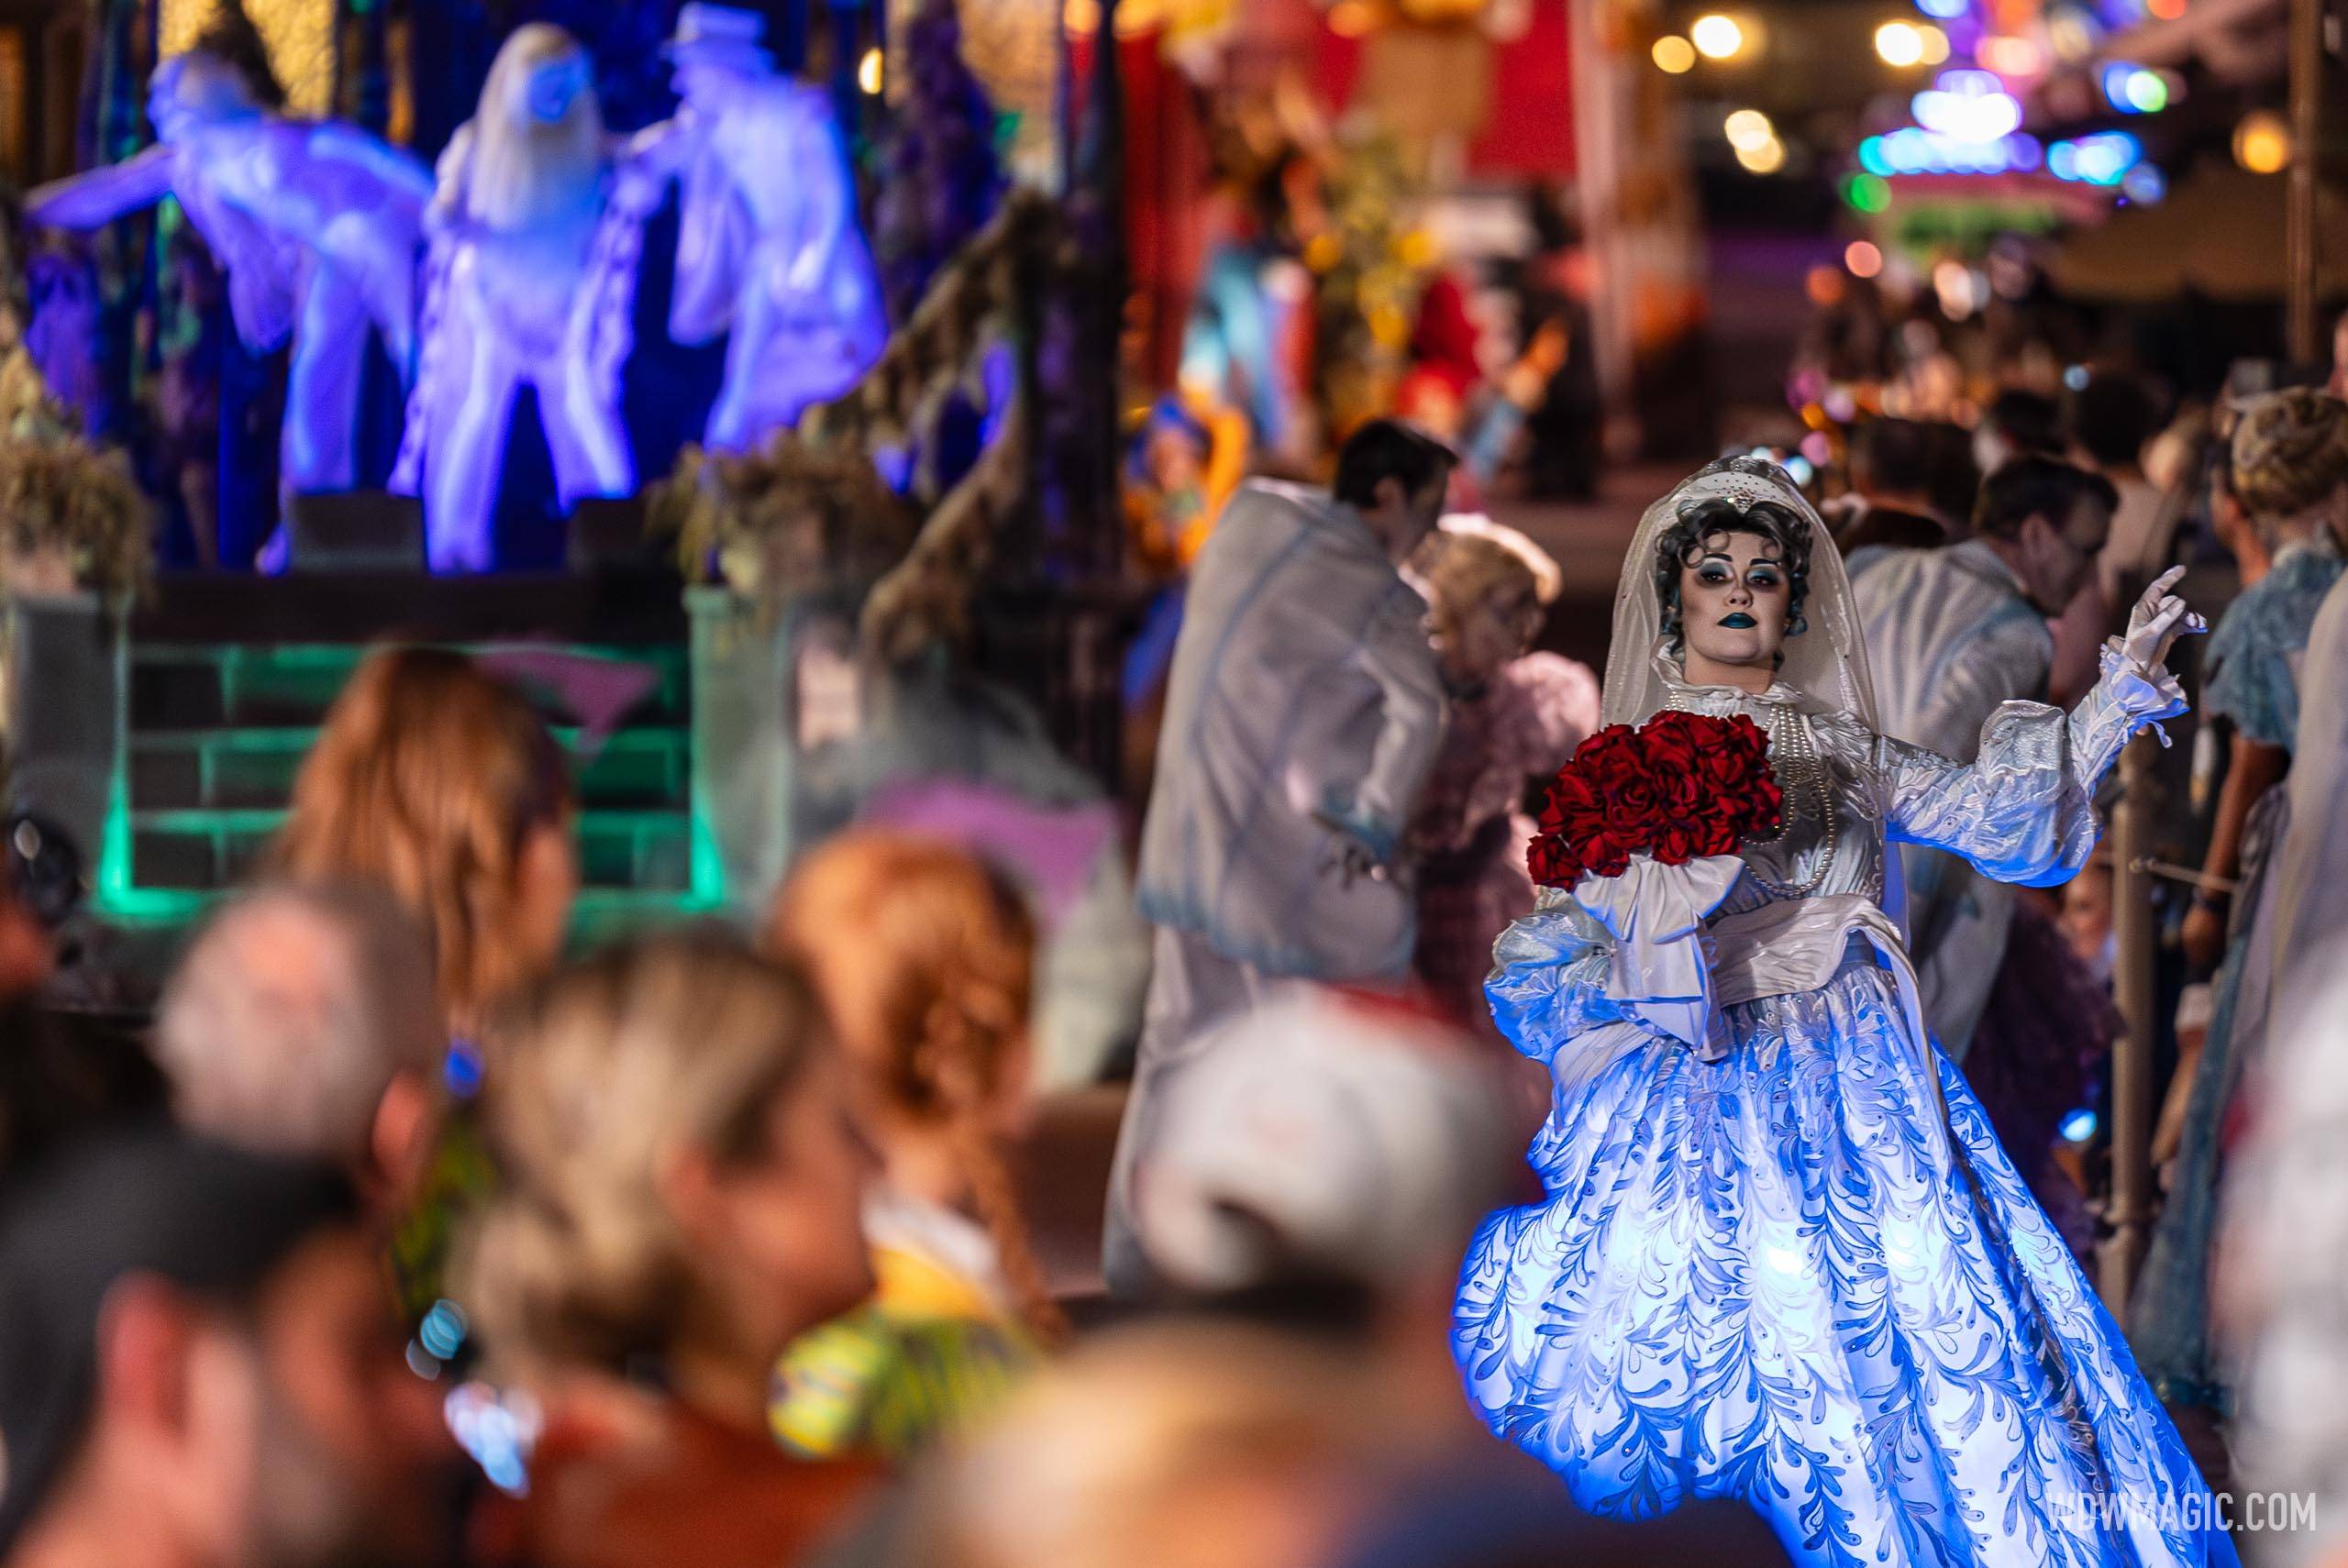 Mickey's Boo-to-You Halloween Parade 2023 - Frontierland